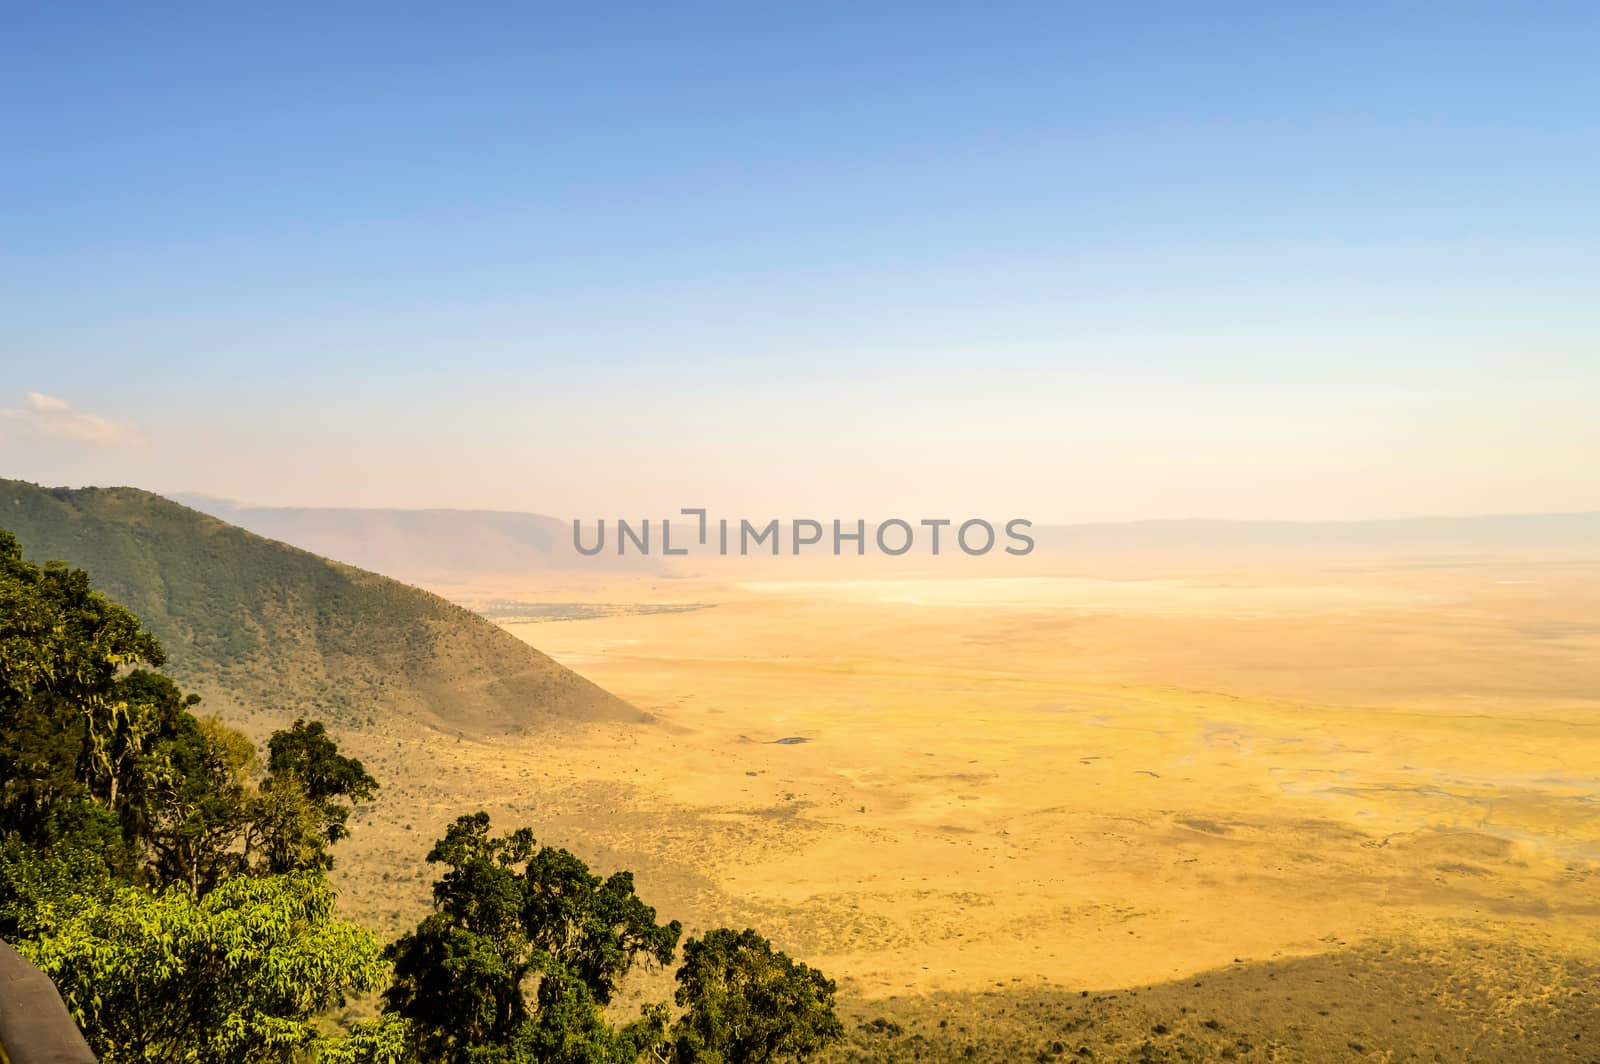 Elevated view of the ground of the Ngorongoro crater from the so by Philou1000